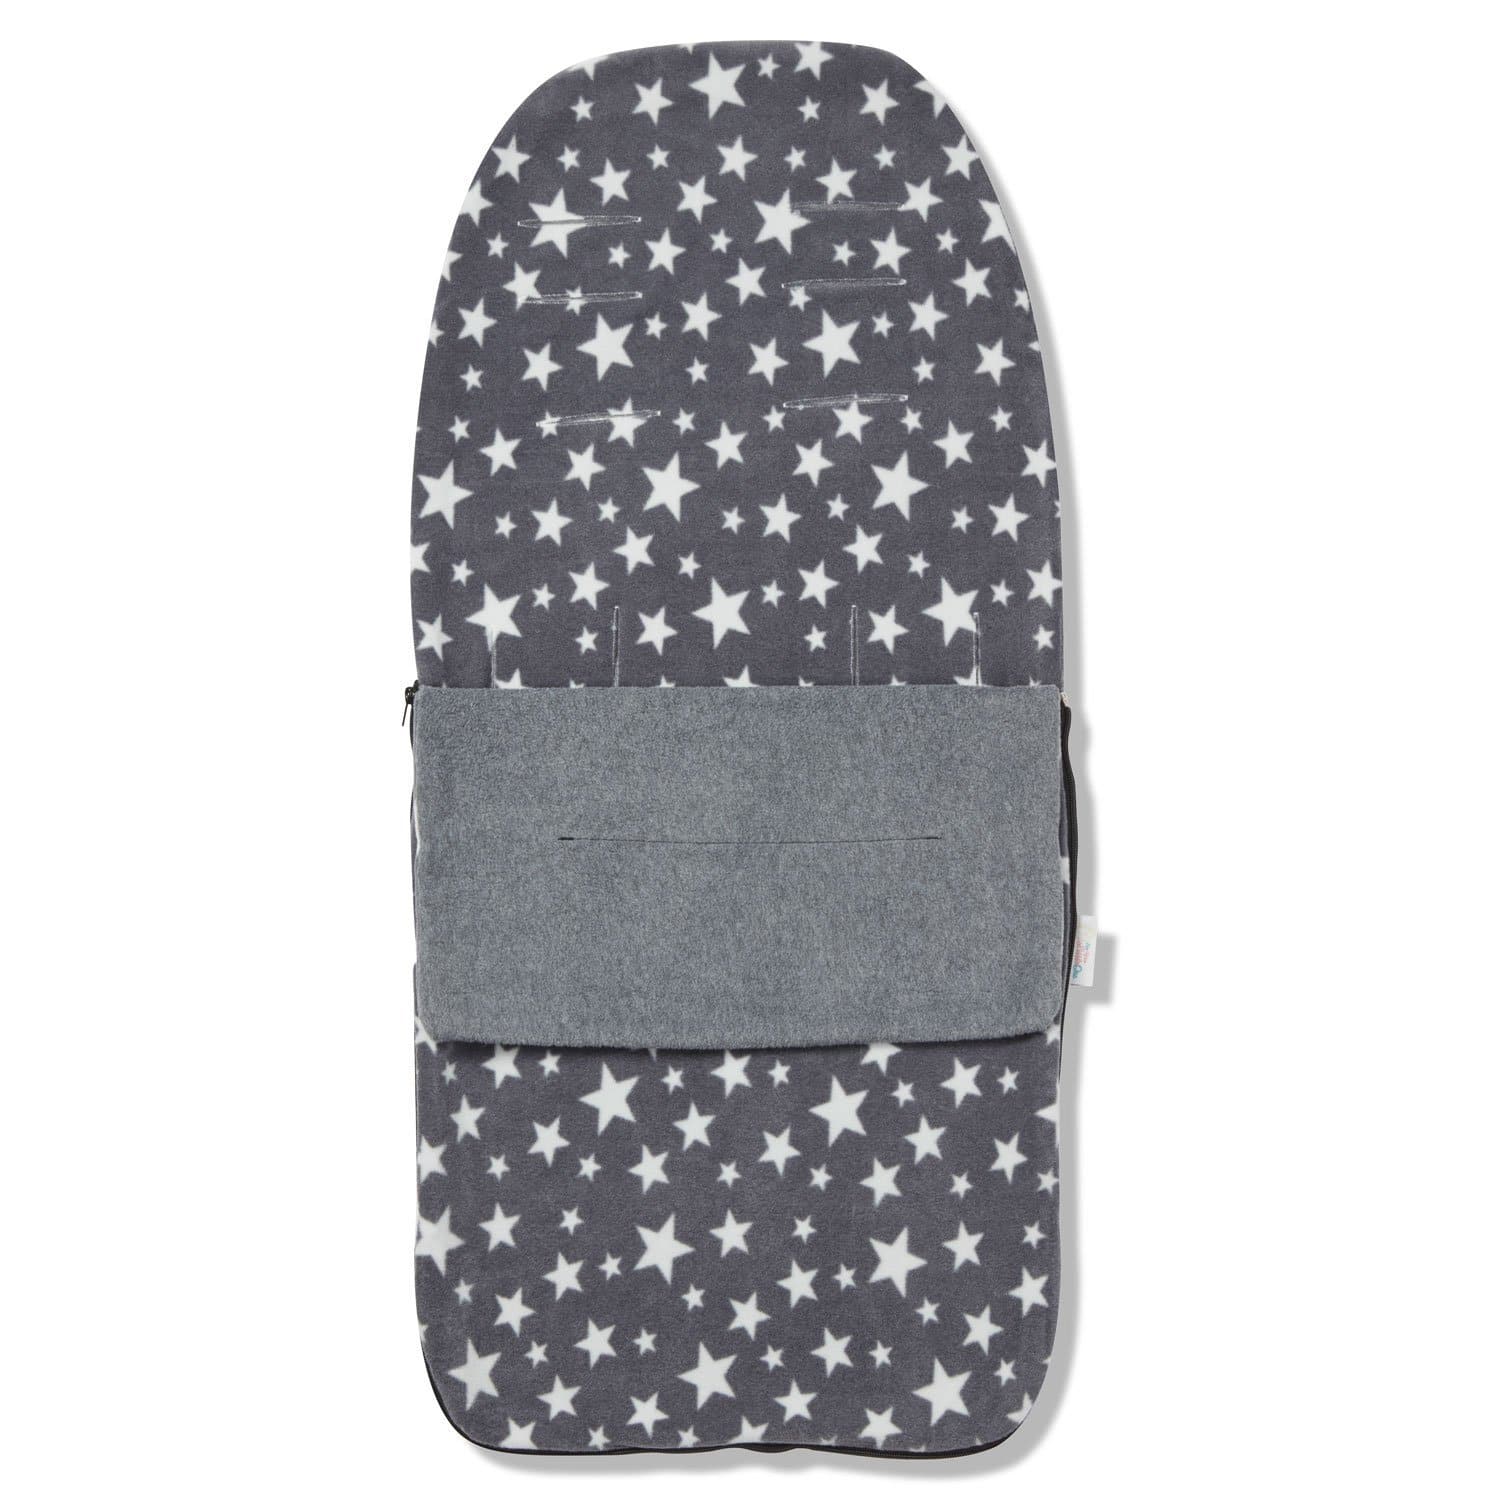 Snuggle Summer Footmuff Compatible with Gesslein - For Your Little One